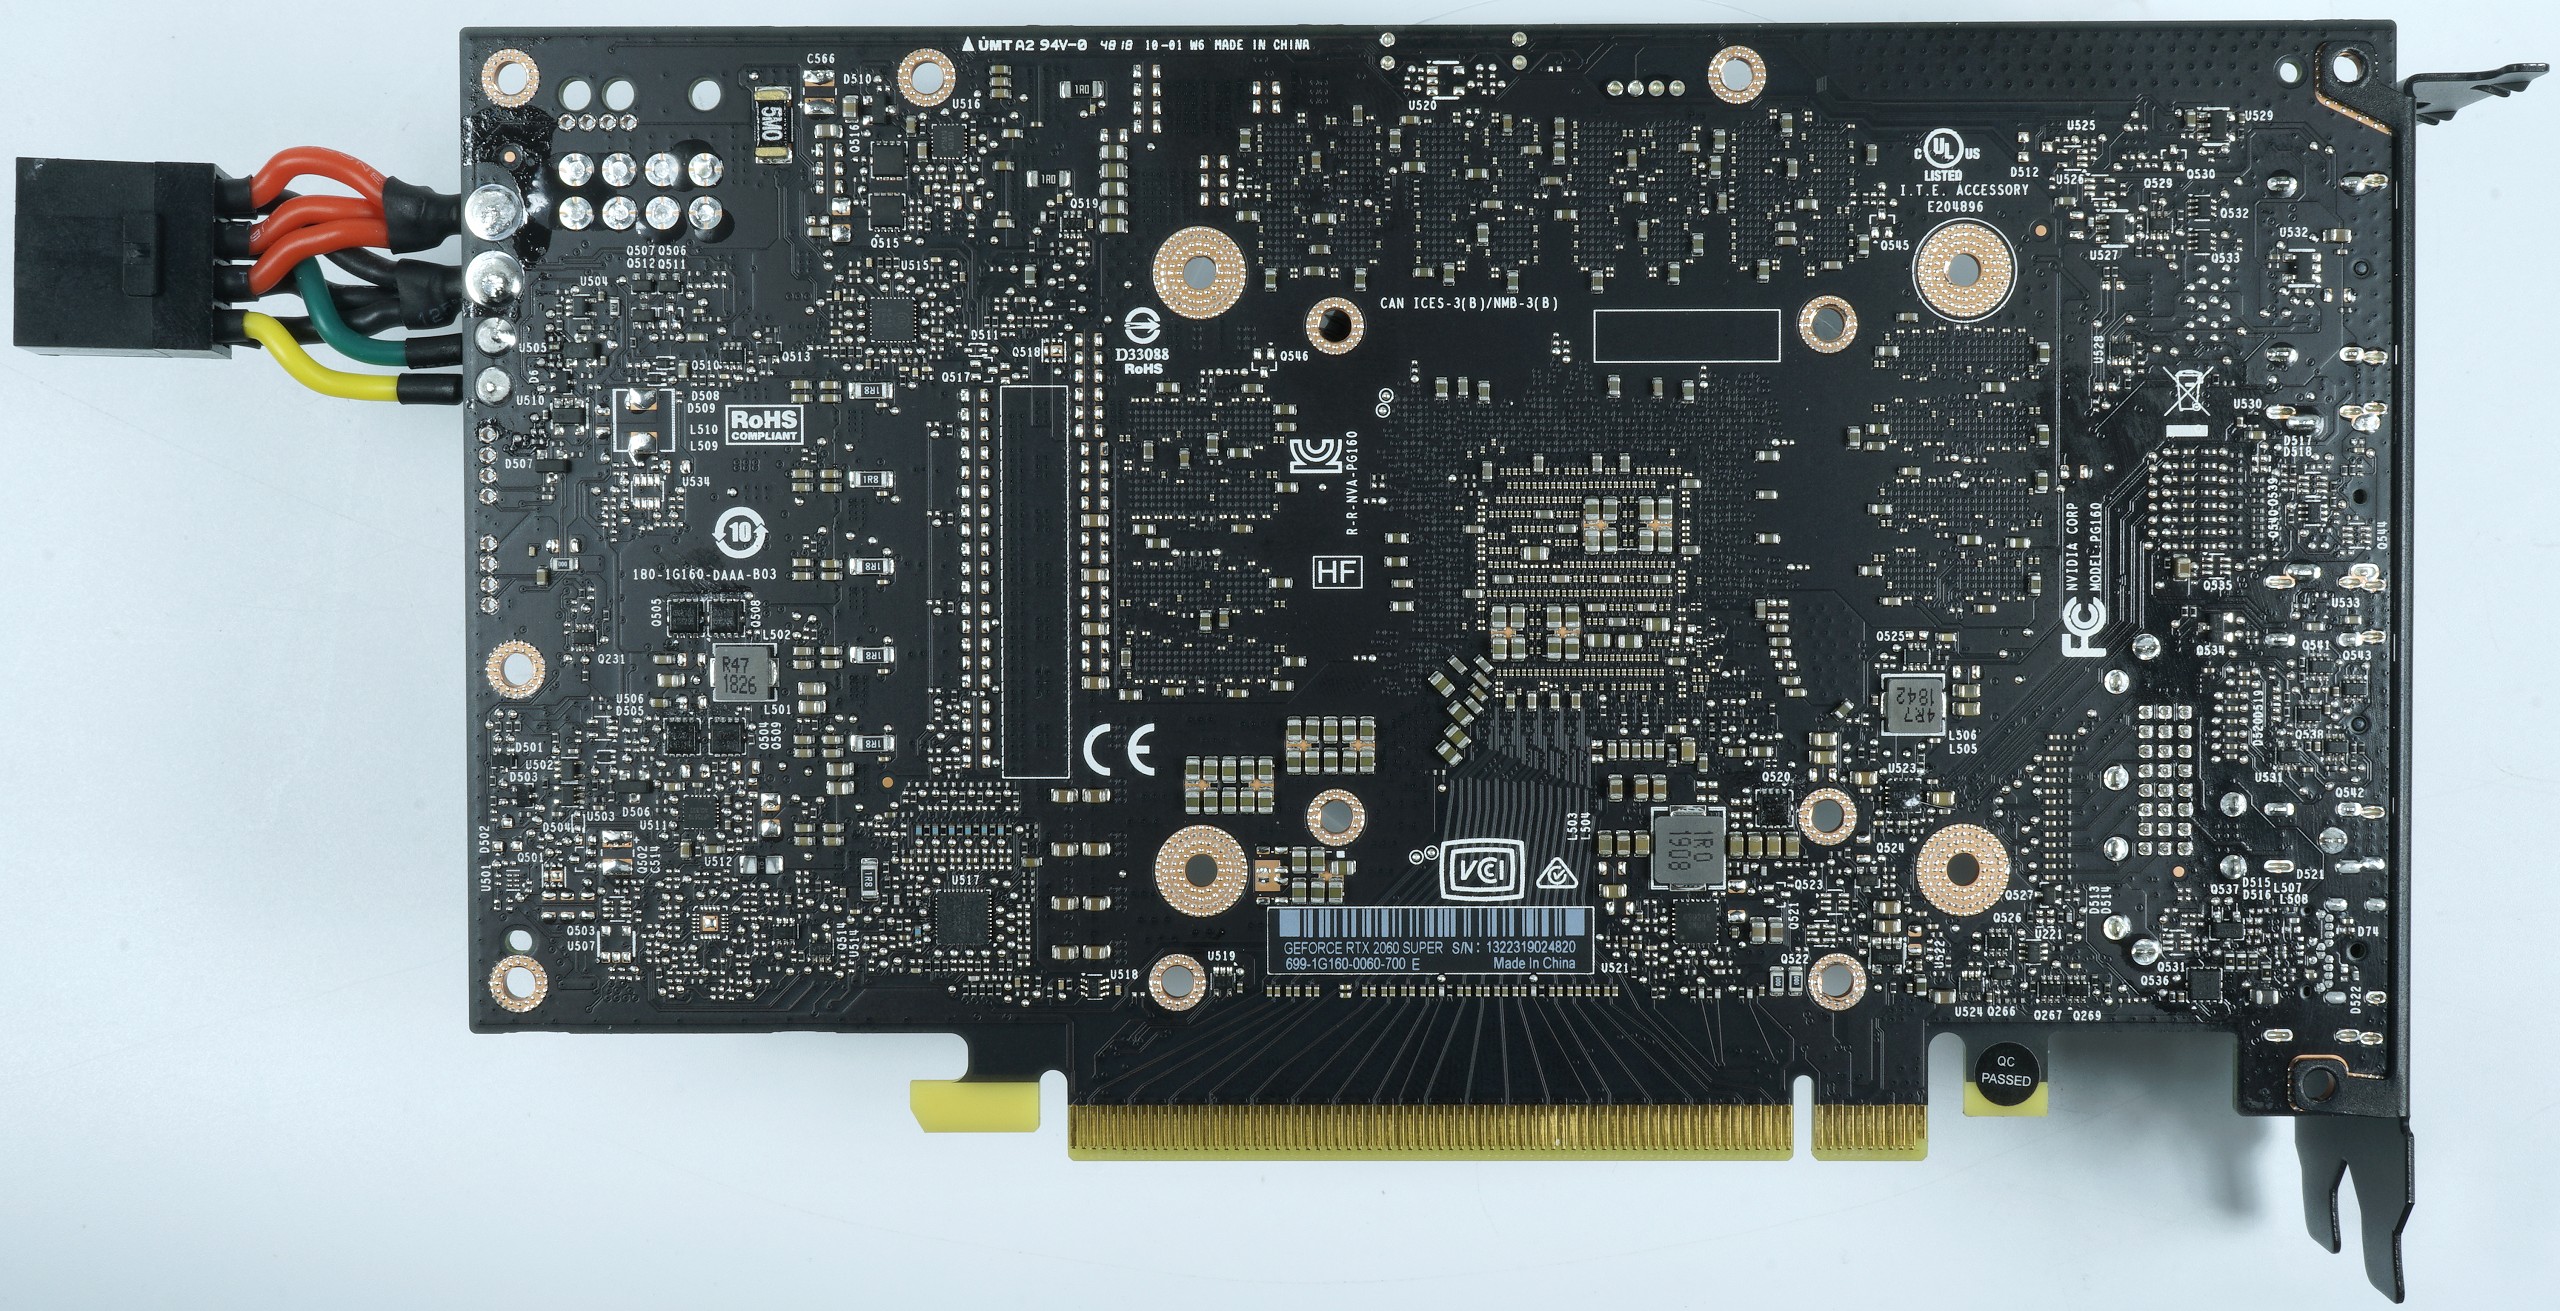 IgorsLab] Turing reloaded as a stopgap? Several board partners ready to  produce GeForce RTX 2060 again : r/hardware